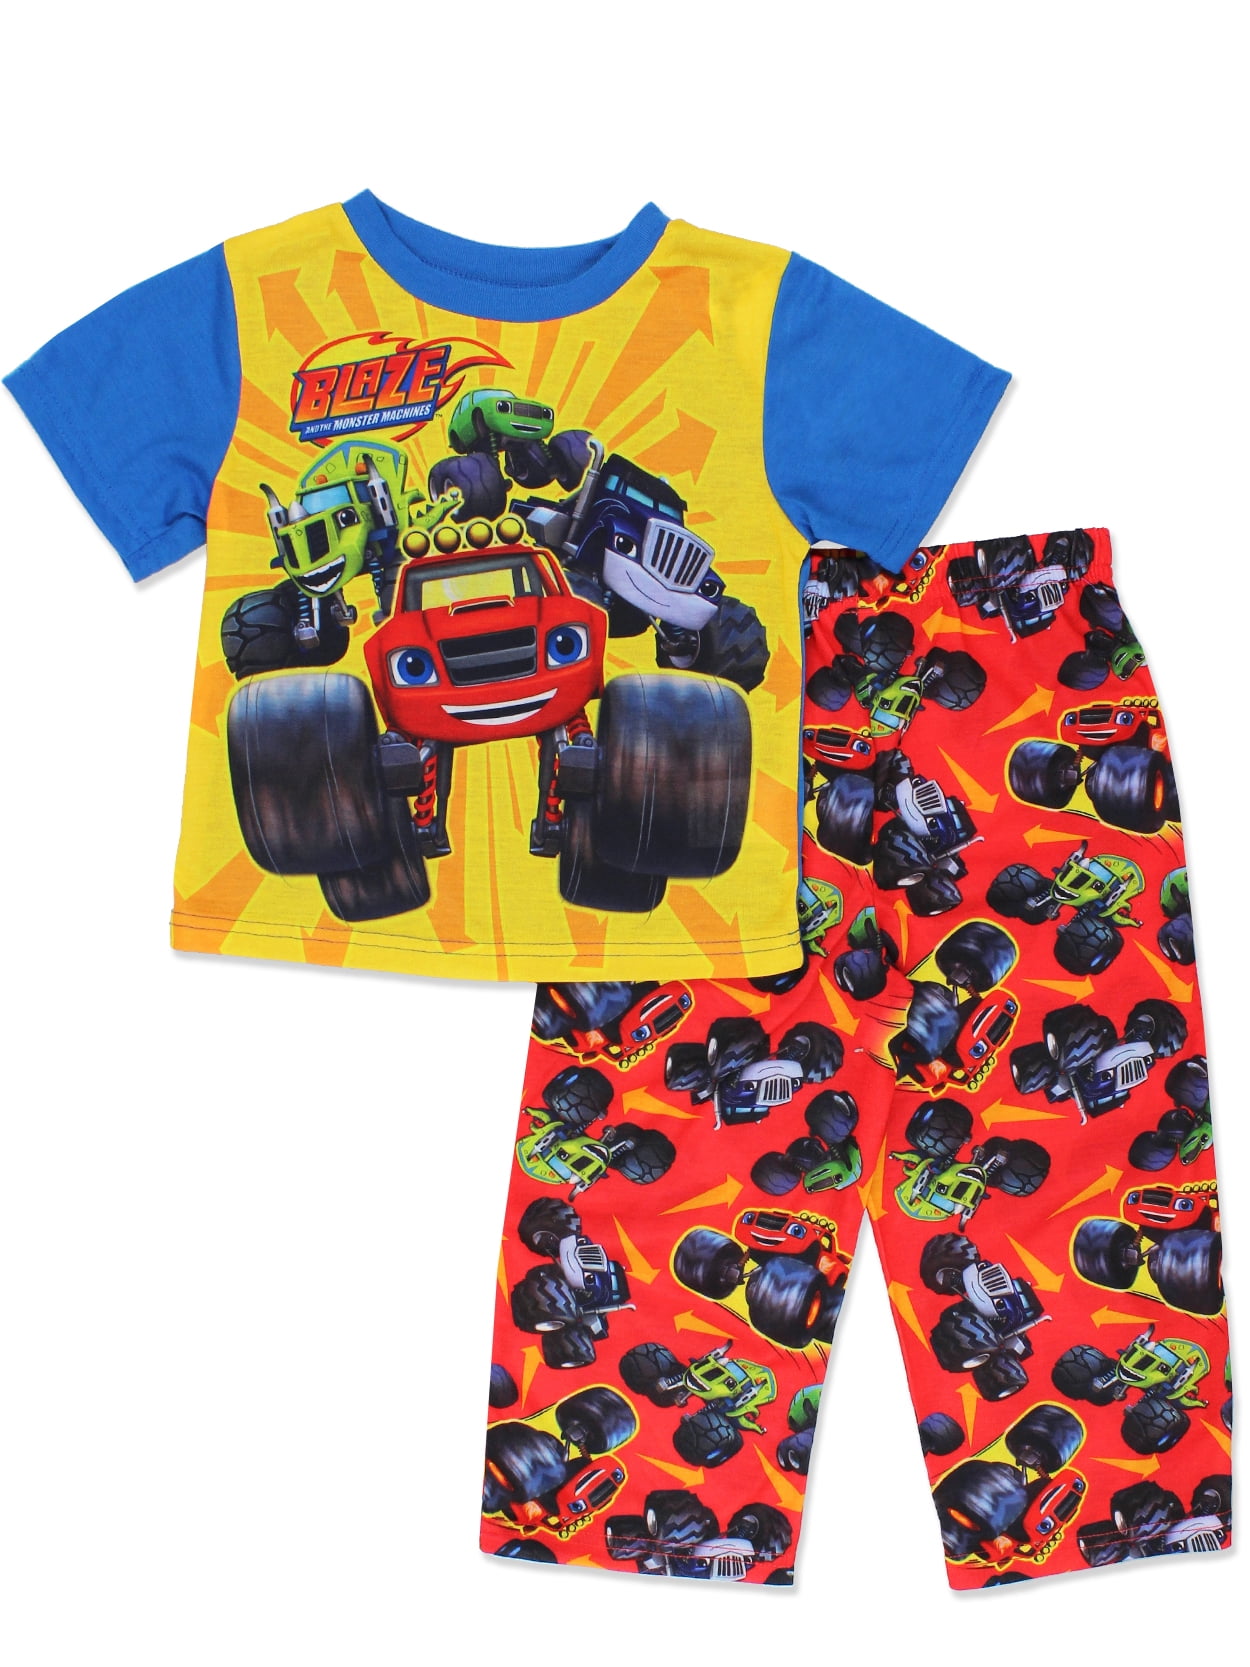 Blaze Boys Pyjamas Ages 18-24 Months to 4-5 Years 